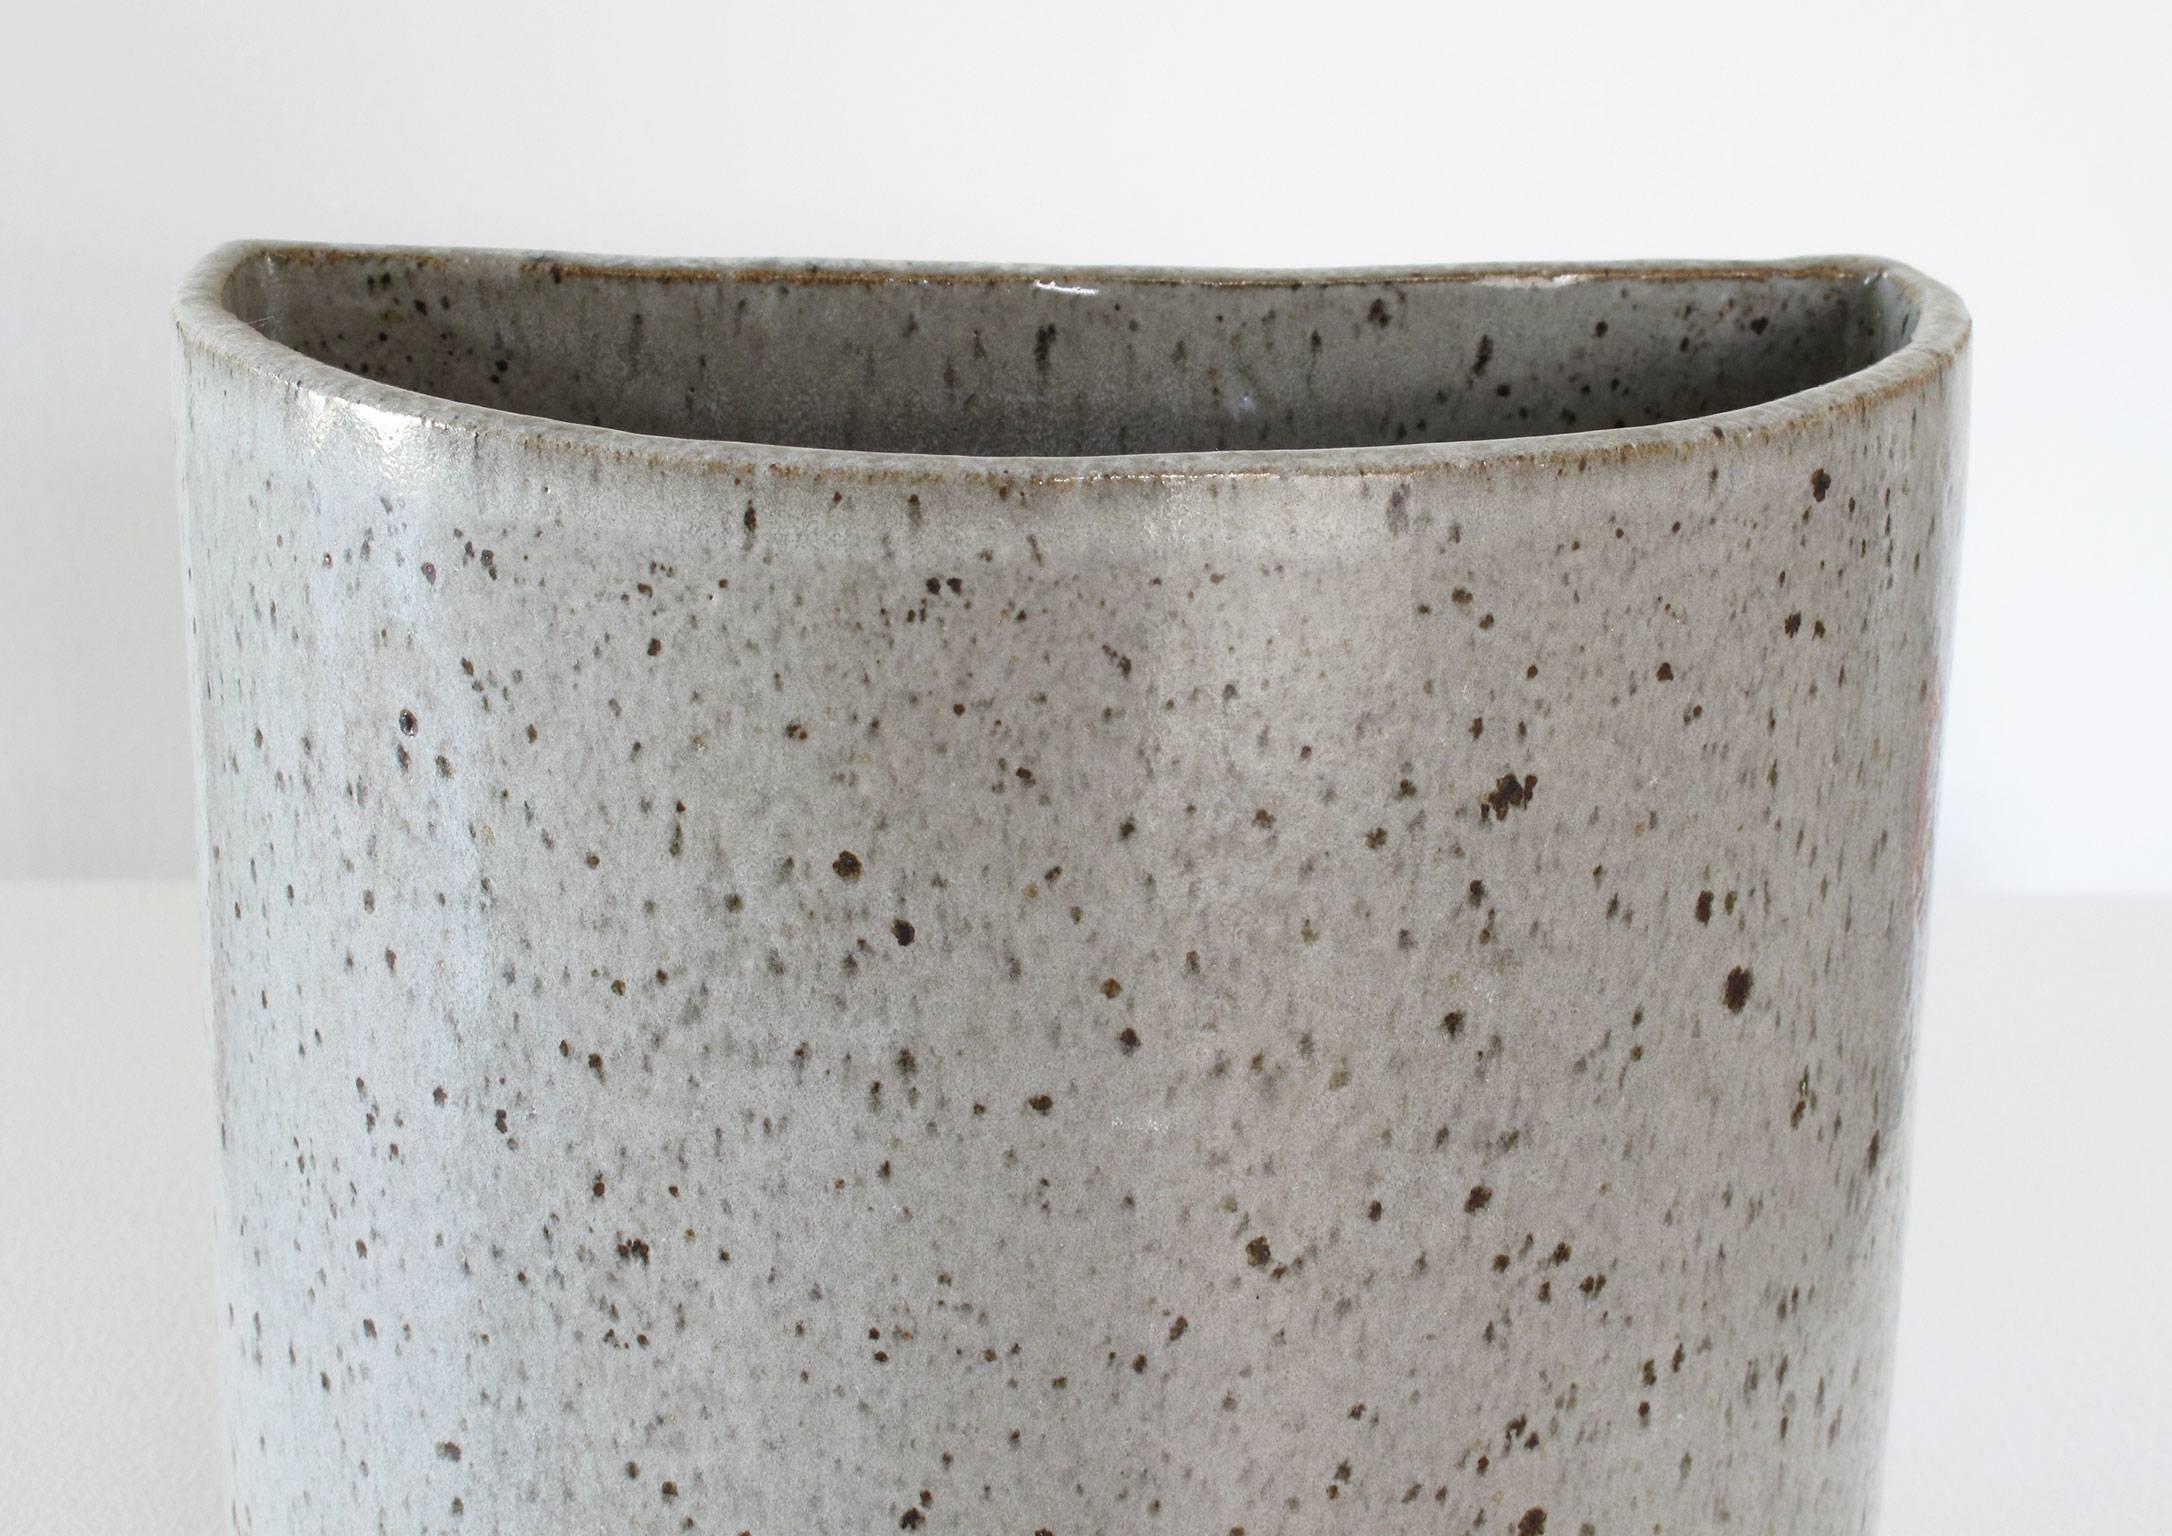 David Cressey Pro Artisan Collection Glazed Grey 'Wall Pocket' Ceramic Planter In Excellent Condition For Sale In Los Angeles, CA